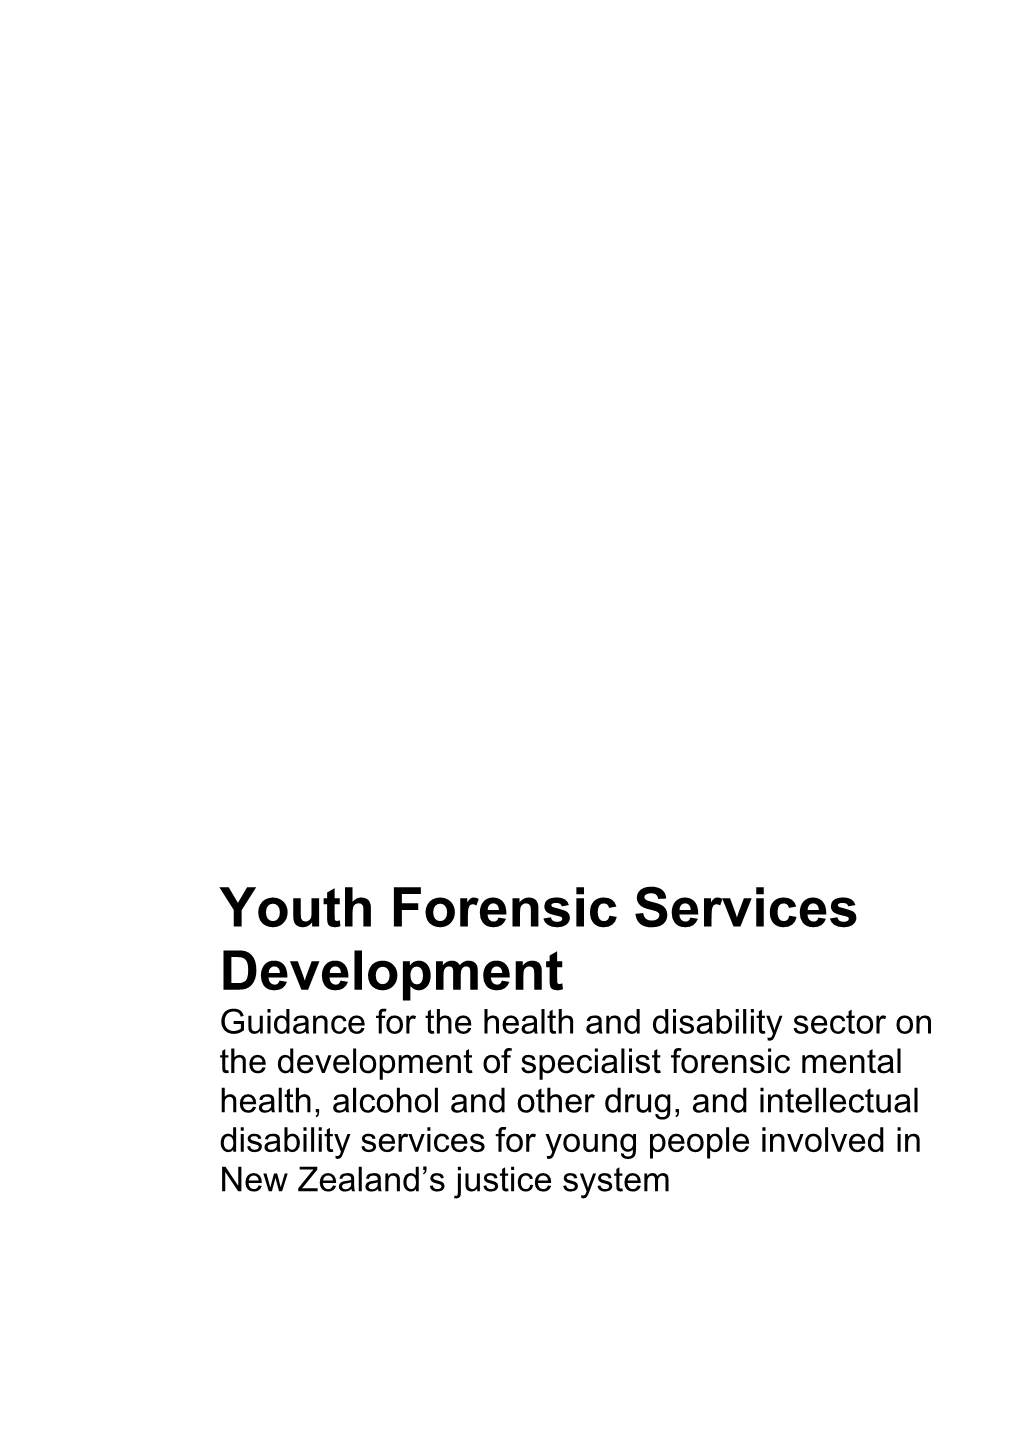 Youth Forensic Services Development